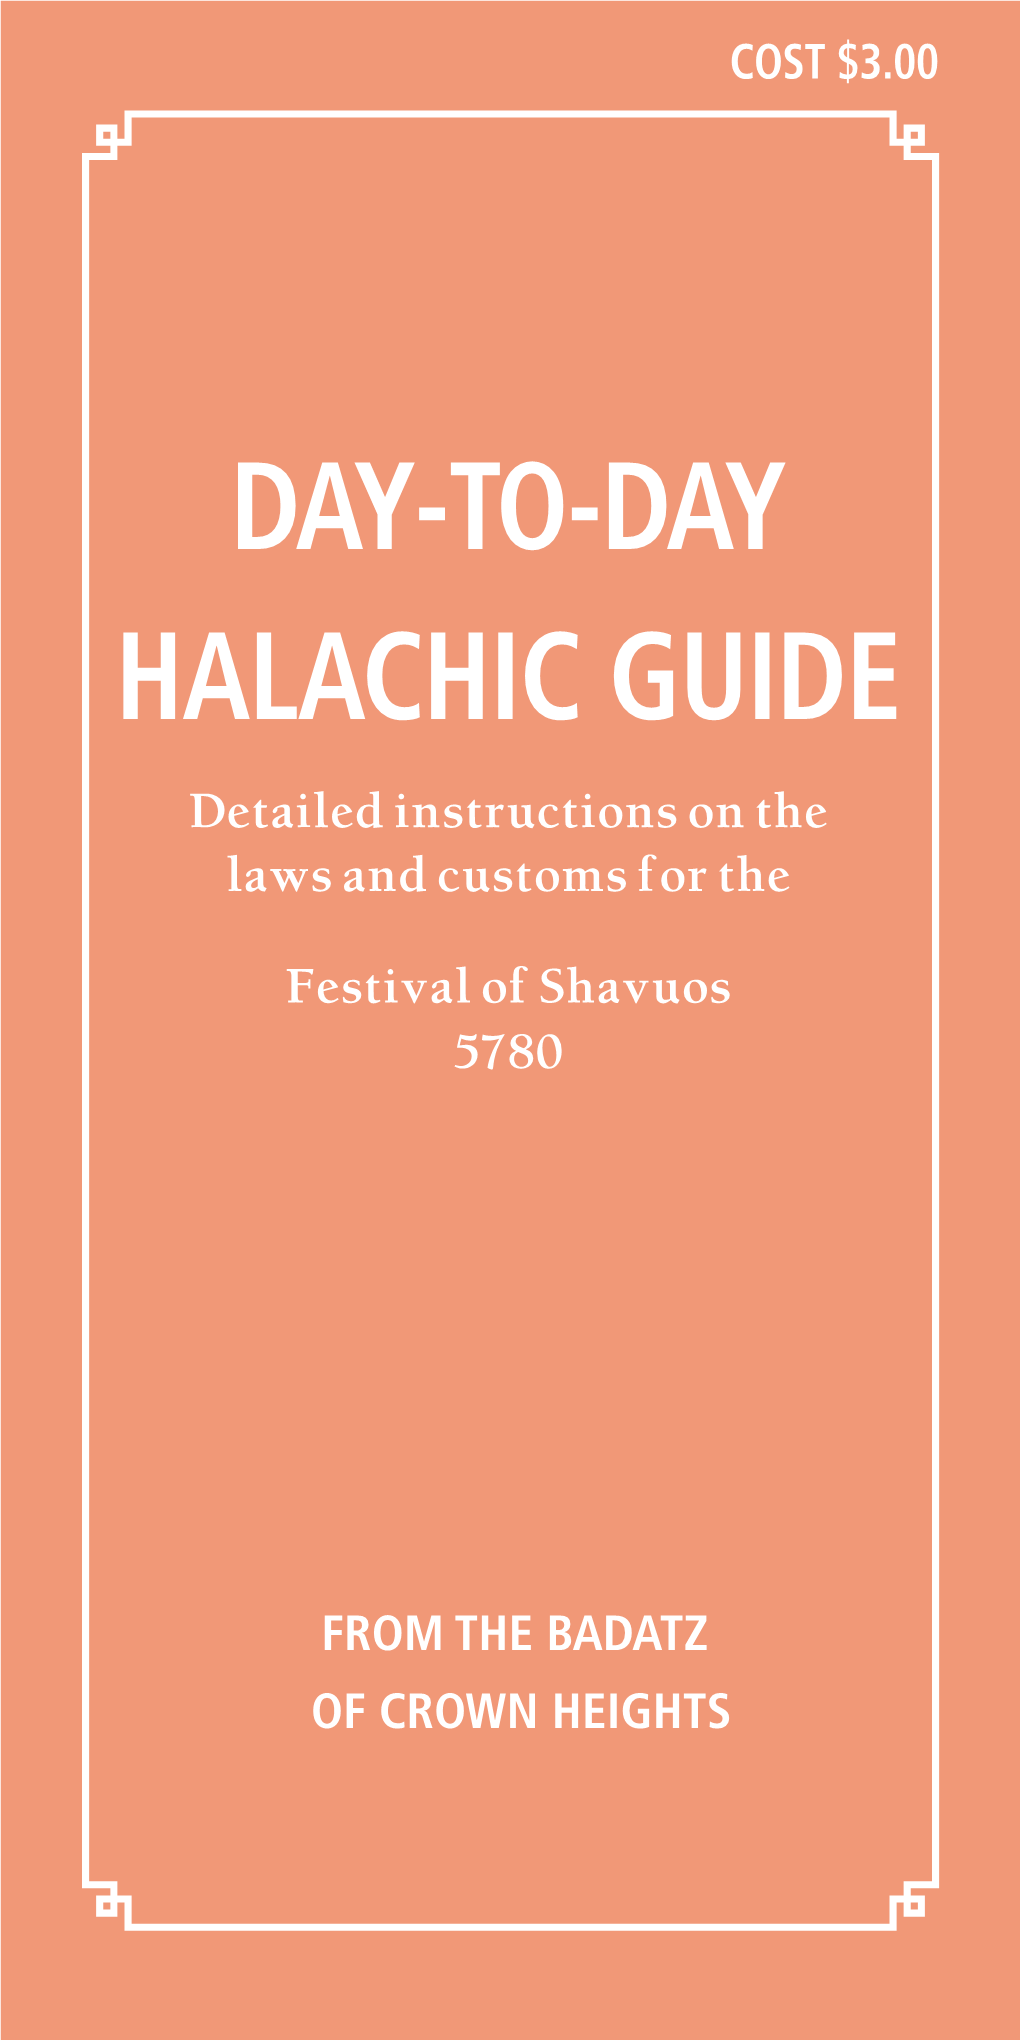 DAY-TO-DAY HALACHIC GUIDE Detailed Instructions on the Laws and Customs for The